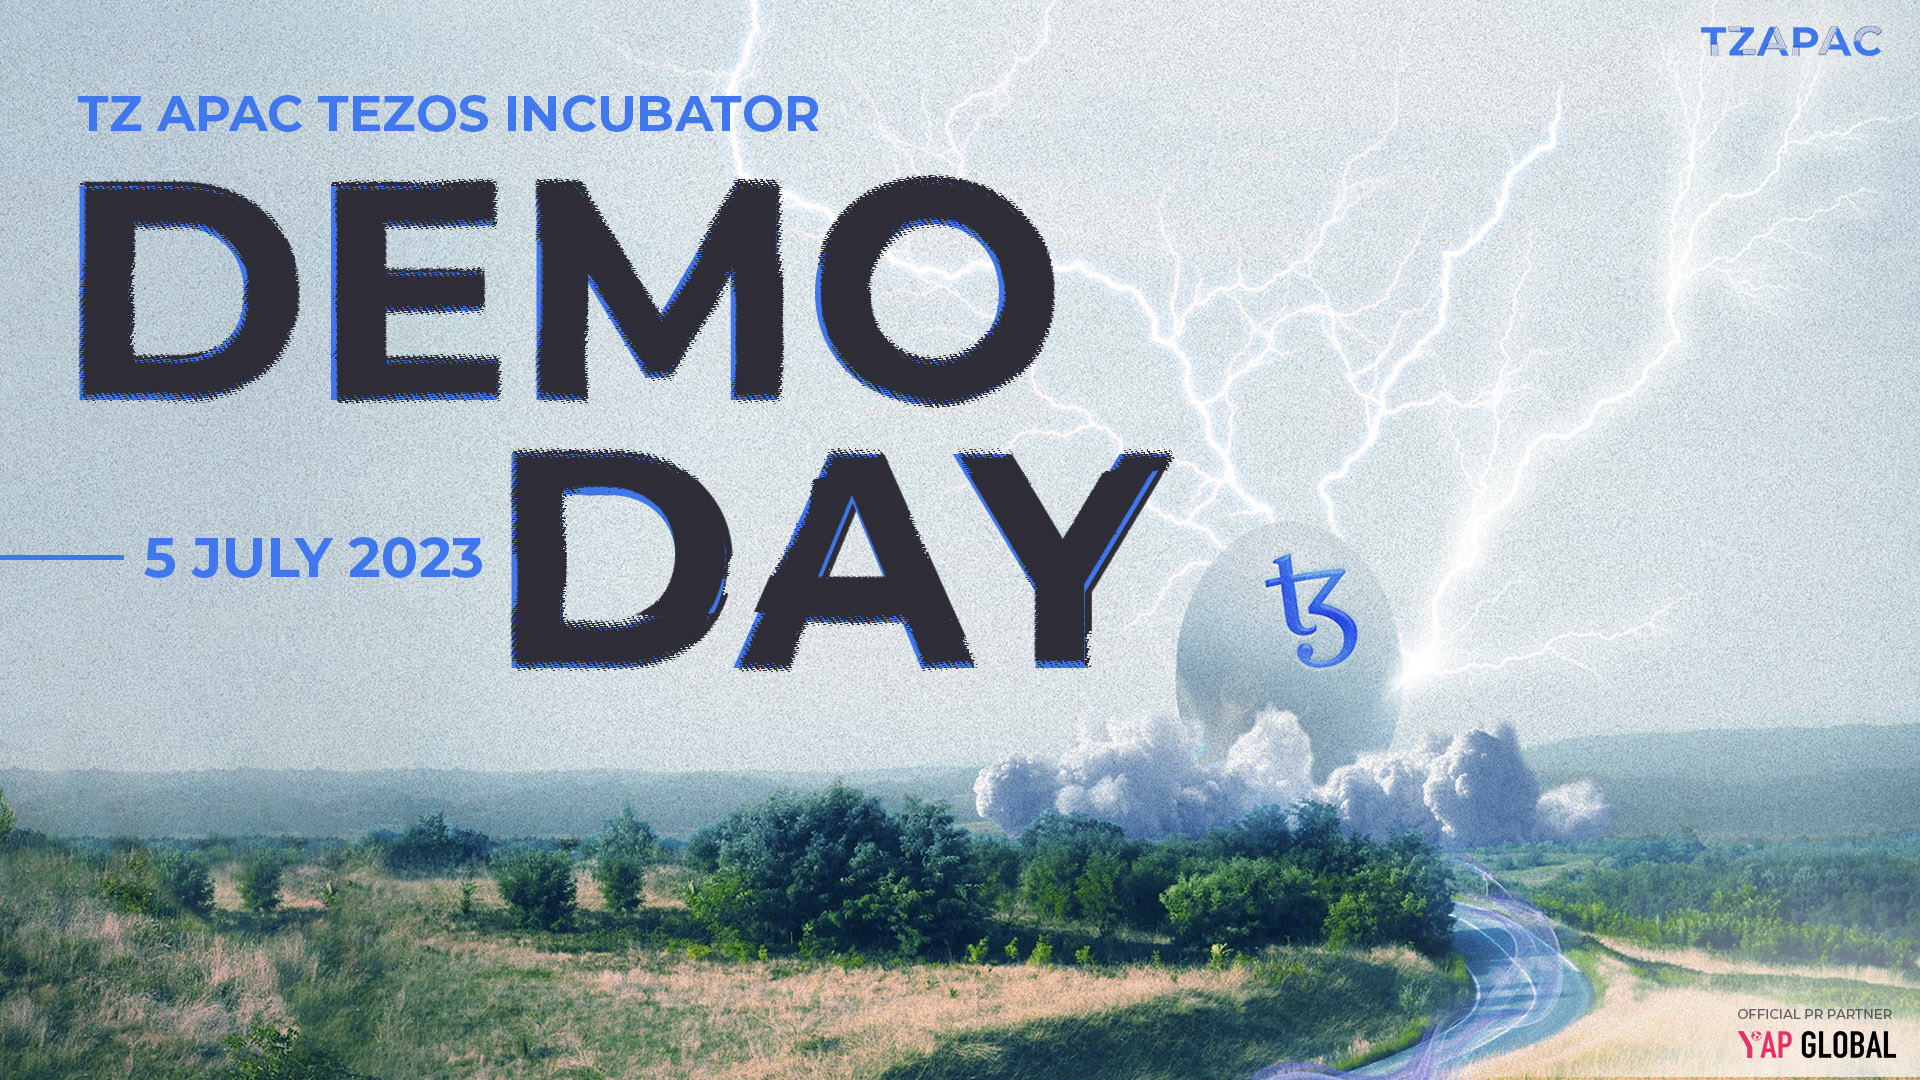 Meet the startups of the TZ APAC Tezos Incubator pitching at Demo Day 2023.